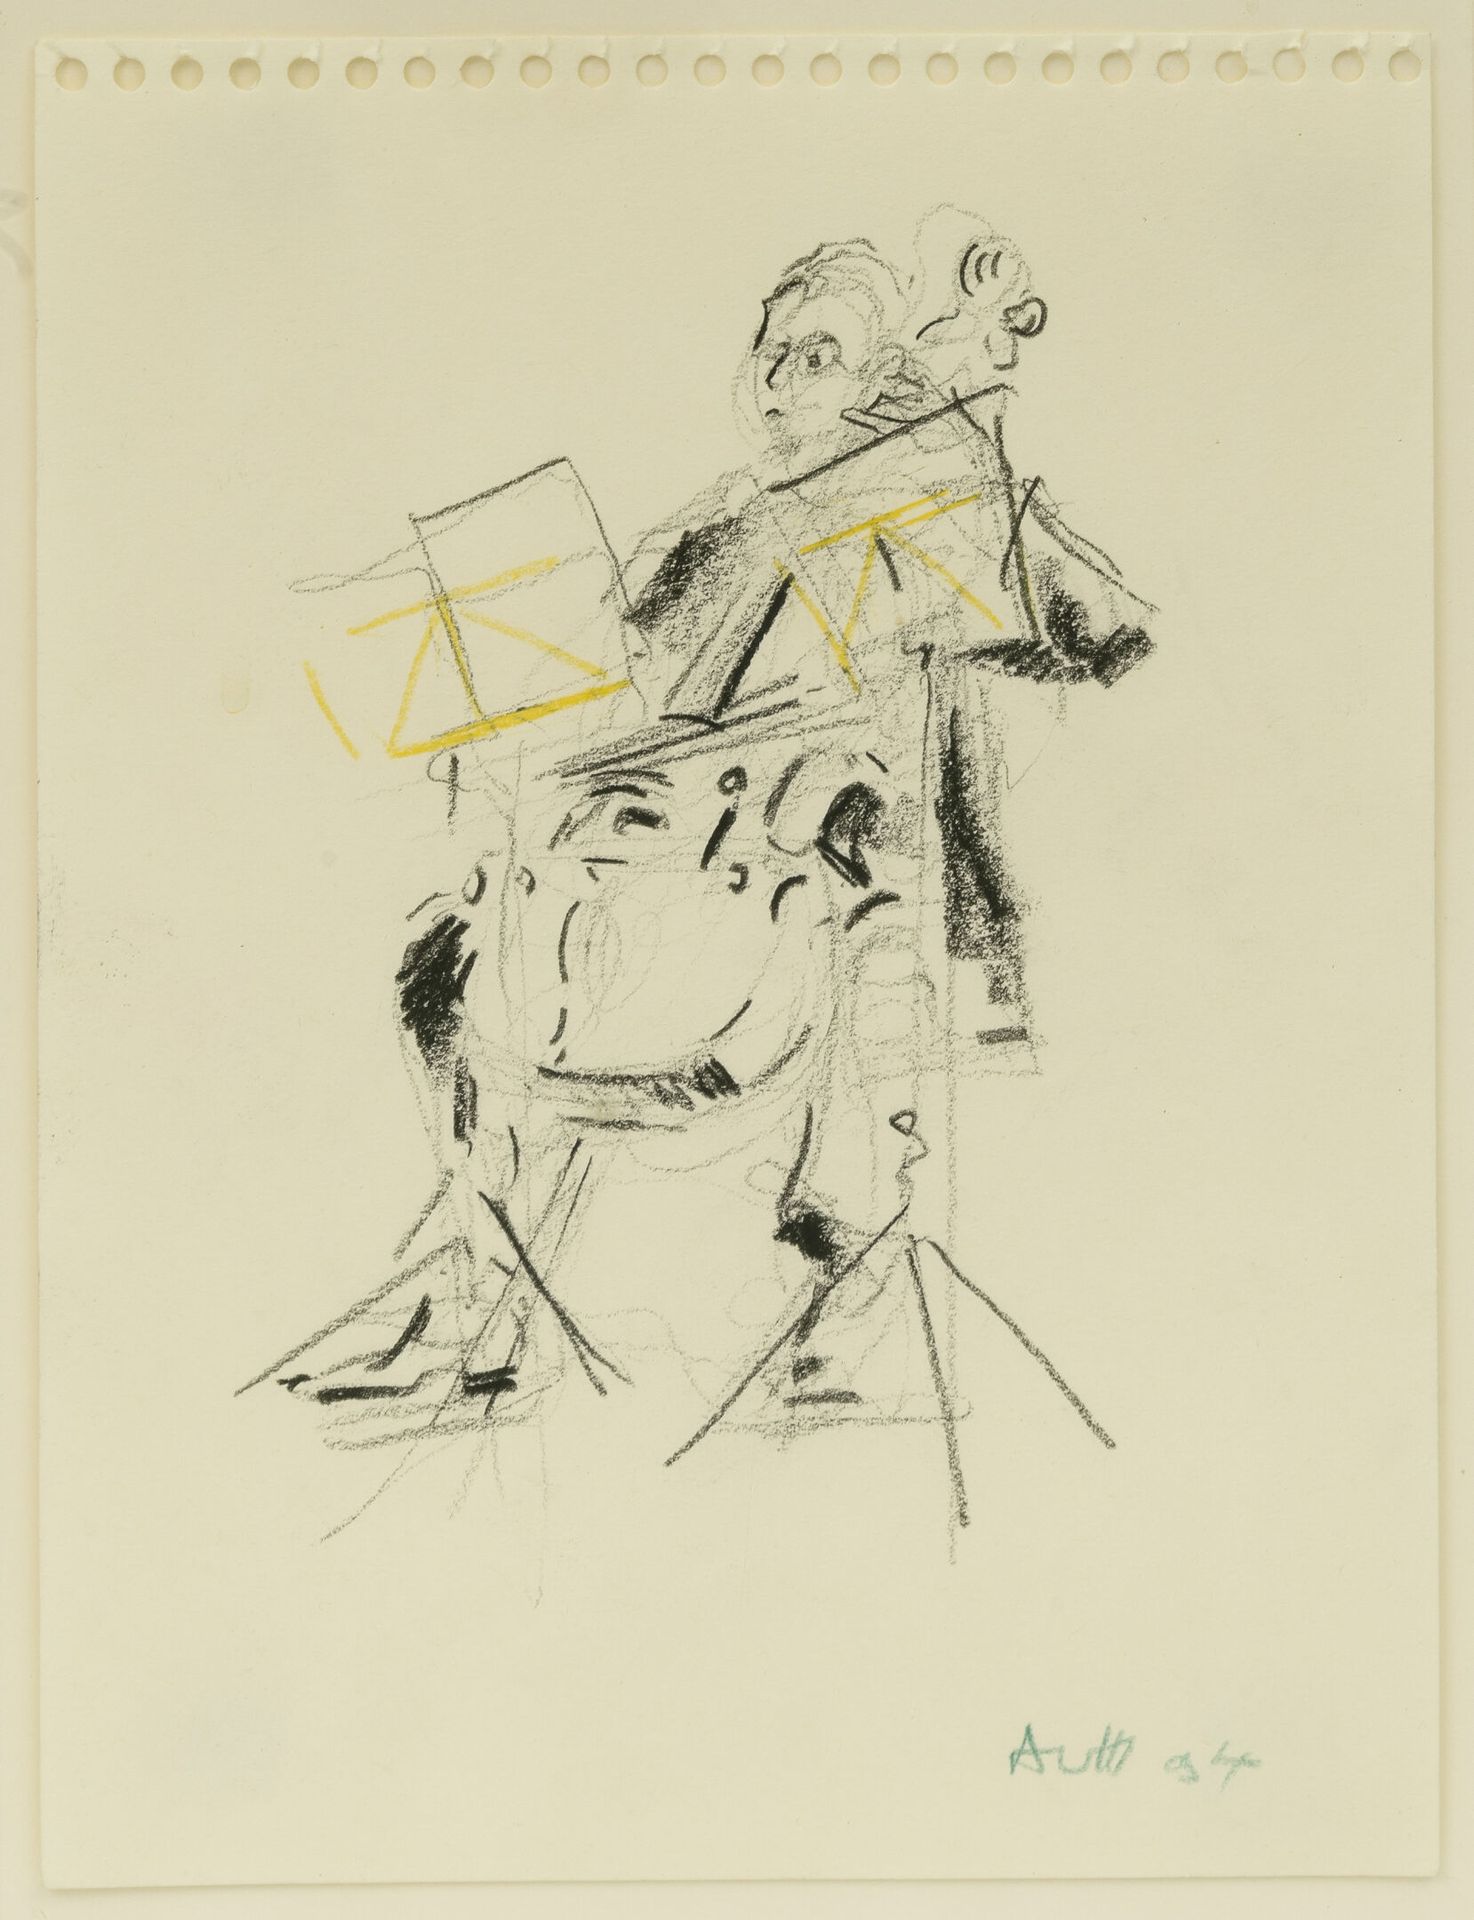 Daniel AUTHOUART (1943) The double bass player, 1994.

Graphite and colored penc&hellip;